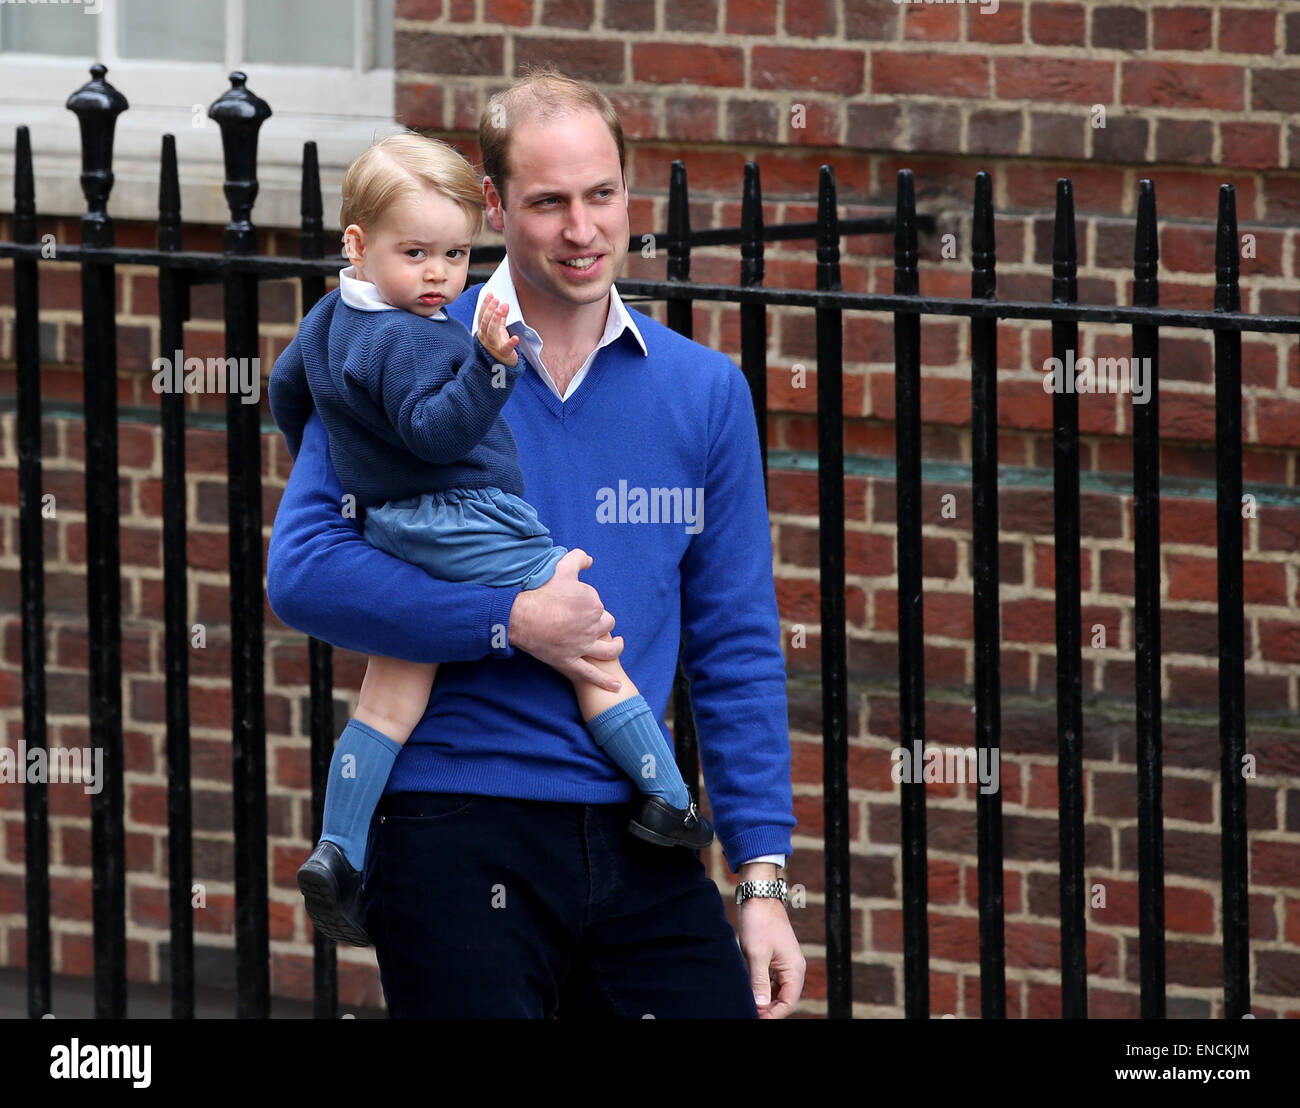 London, London, UK. 2nd May, 2015. Prince William, Duke of Cambridge, holding Prince George arrive at St. Mary's Hospital after Catherine, Duchess of Cambridge, gave birth to a baby girl here in London, on May 2, 2015. The newborn baby girl made her first appearance to the public with the Duke of Cambridge and the Duchess outside St. Mary's Hospital on Saturday evening. Credit:  Han Yan/Xinhua/Alamy Live News Stock Photo